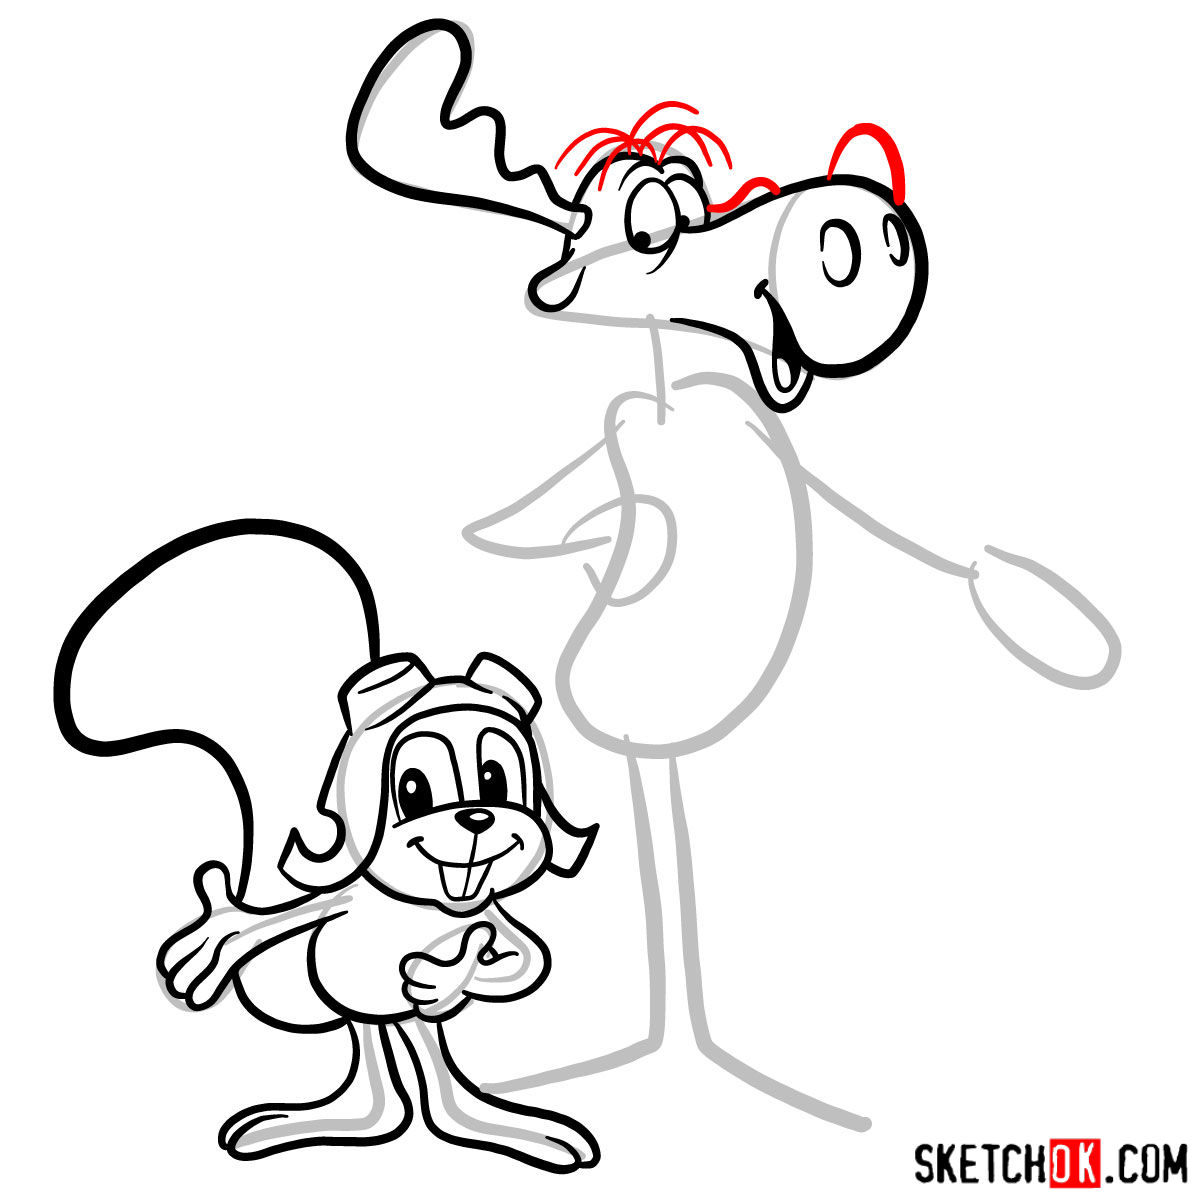 How to draw Rocky and Bullwinkle together - step 11